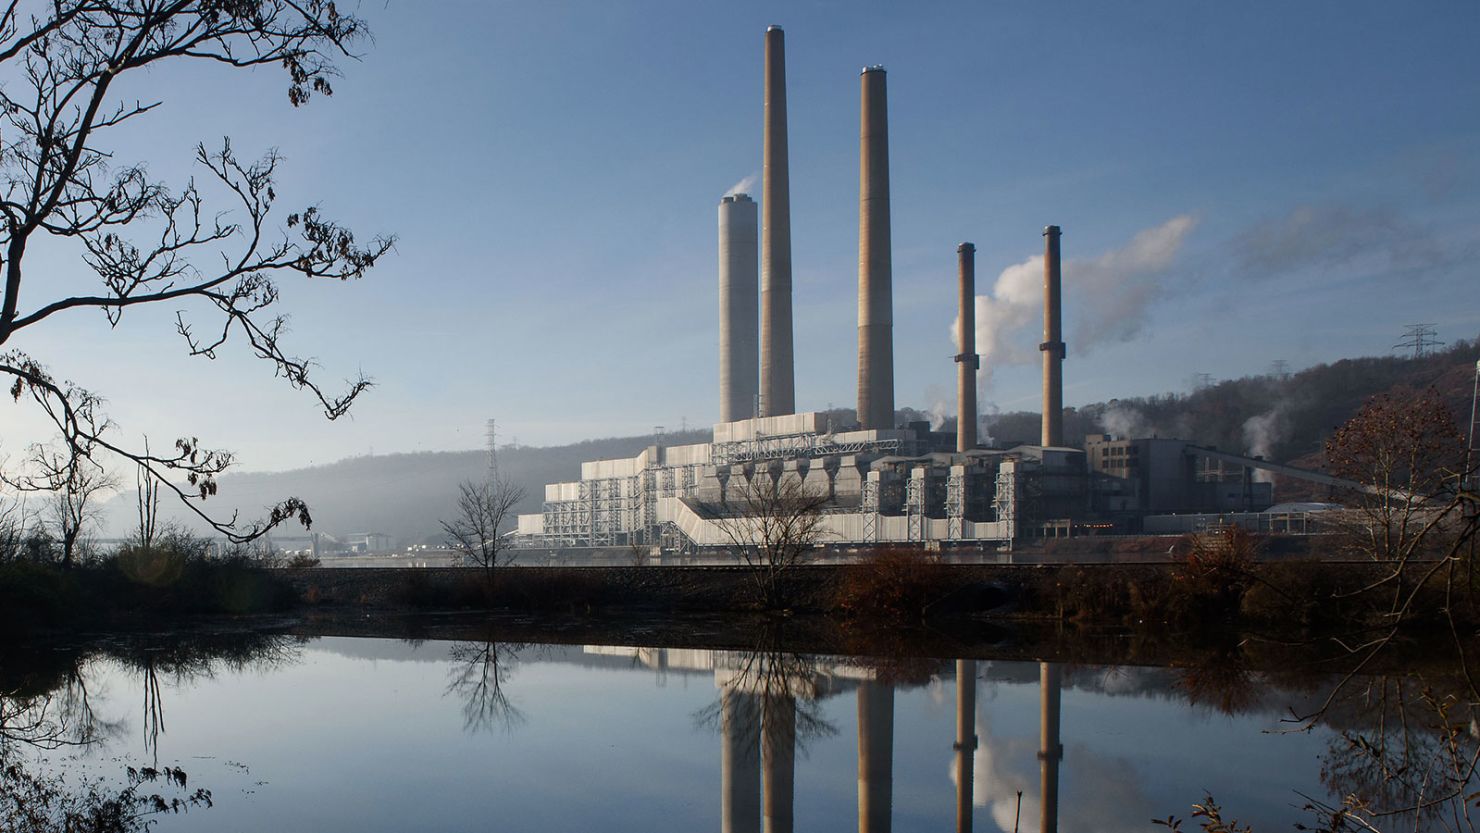 The W.H. Sammis Plant coal-fired power plant in Stratton, Ohio, closed in 2023 -- one of several coal-fired plants that shuttered as the country transitions to more efficient energy sources.